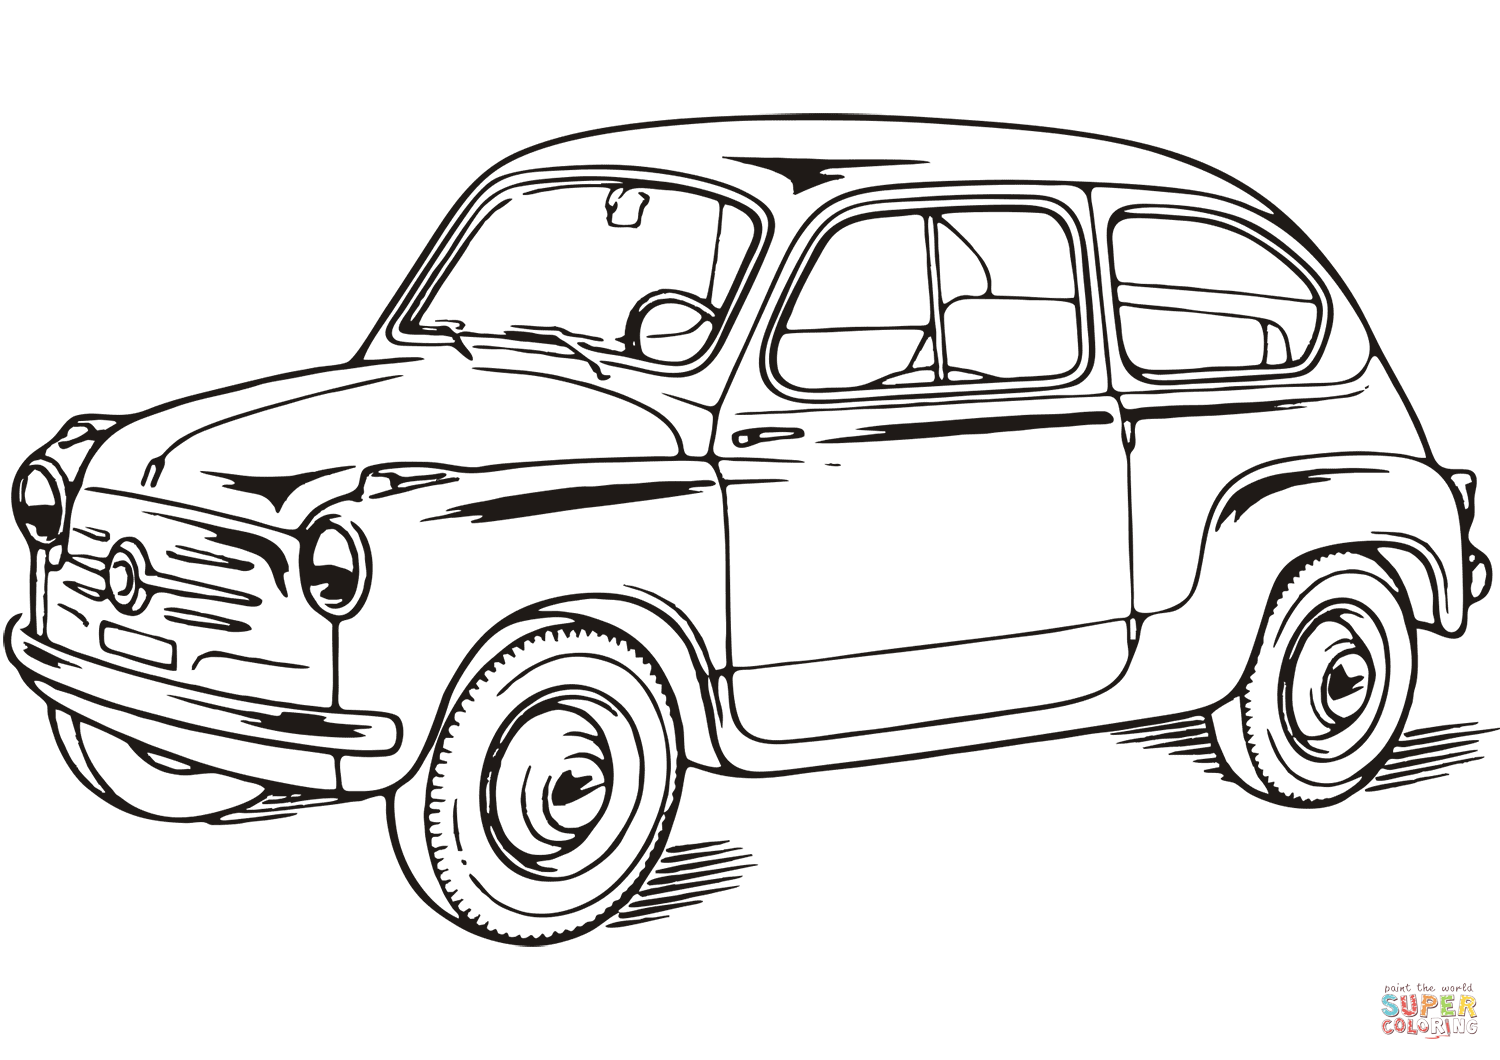 Fiat coloring page free printable coloring pages fiat fiat cars fiat